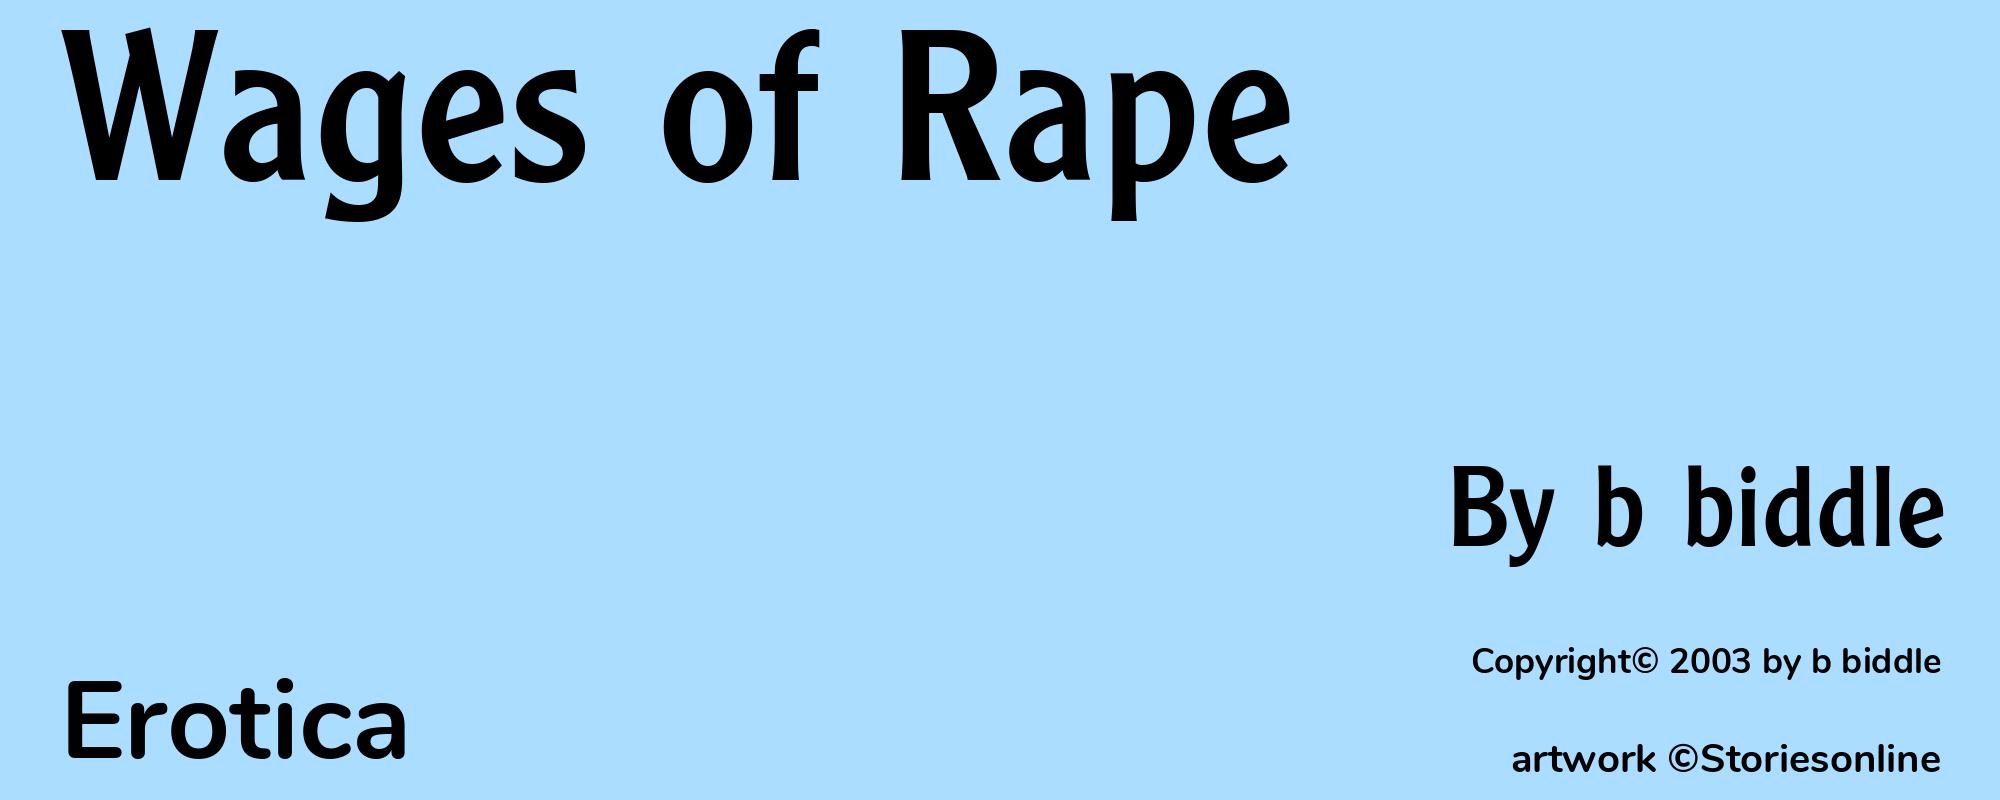 Wages of Rape - Cover